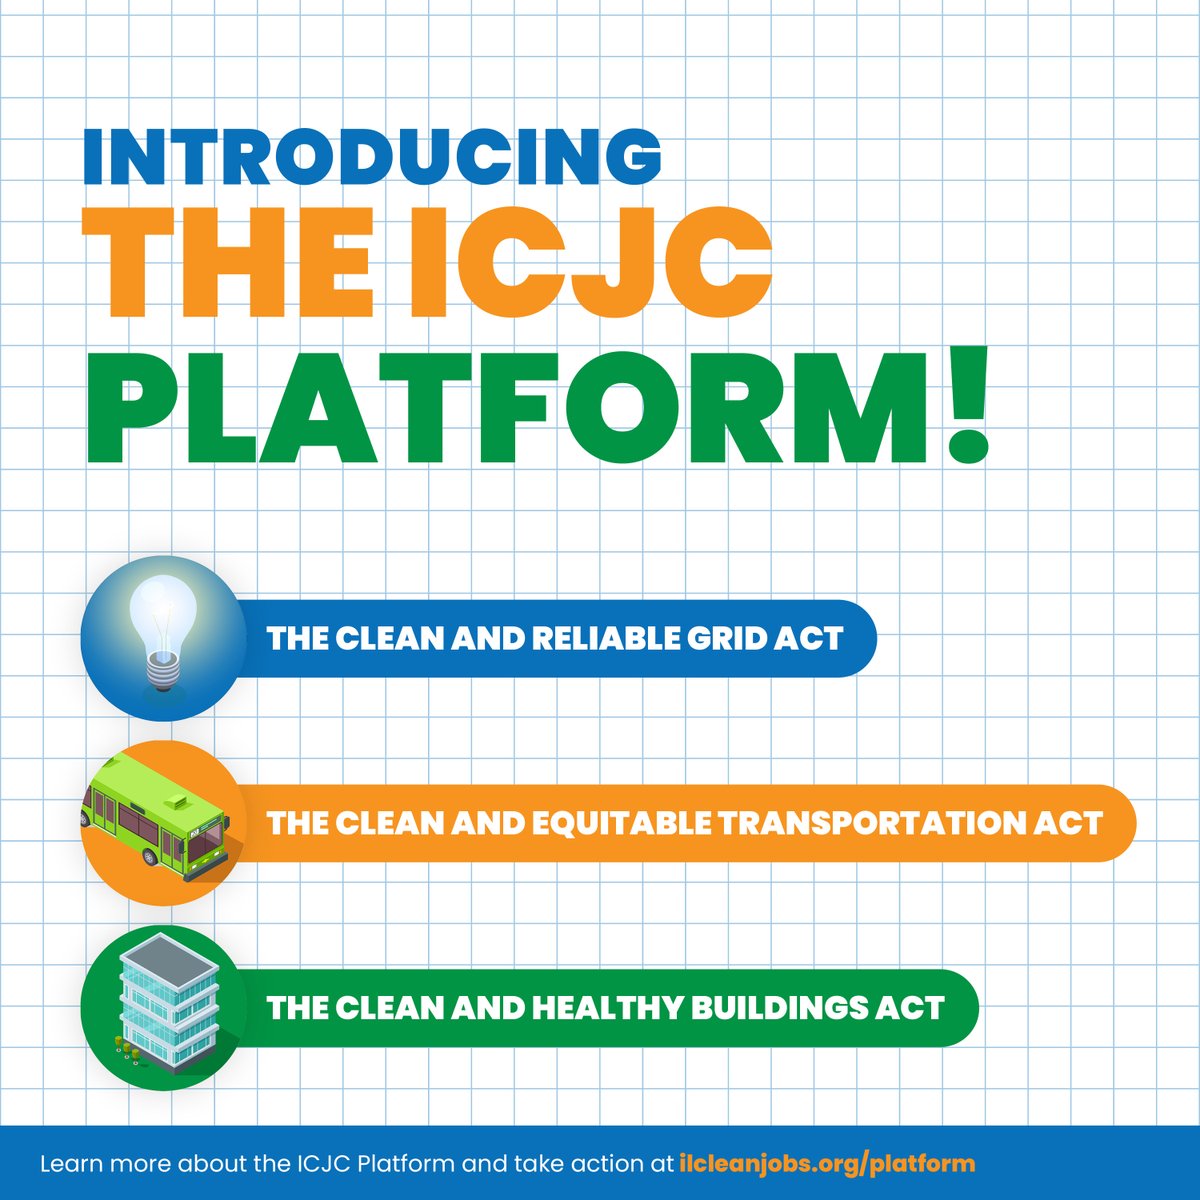 Help us achieve the clean energy future! The new @ILCleanJobs Platform includes bills that lower greenhouse gas emissions, create green jobs & make our communities safer & healthier. Contact your decision-makers in support of the platform. #ElectrifyIL 🚨 act.ilenviro.org/a/clean-jobs-c…